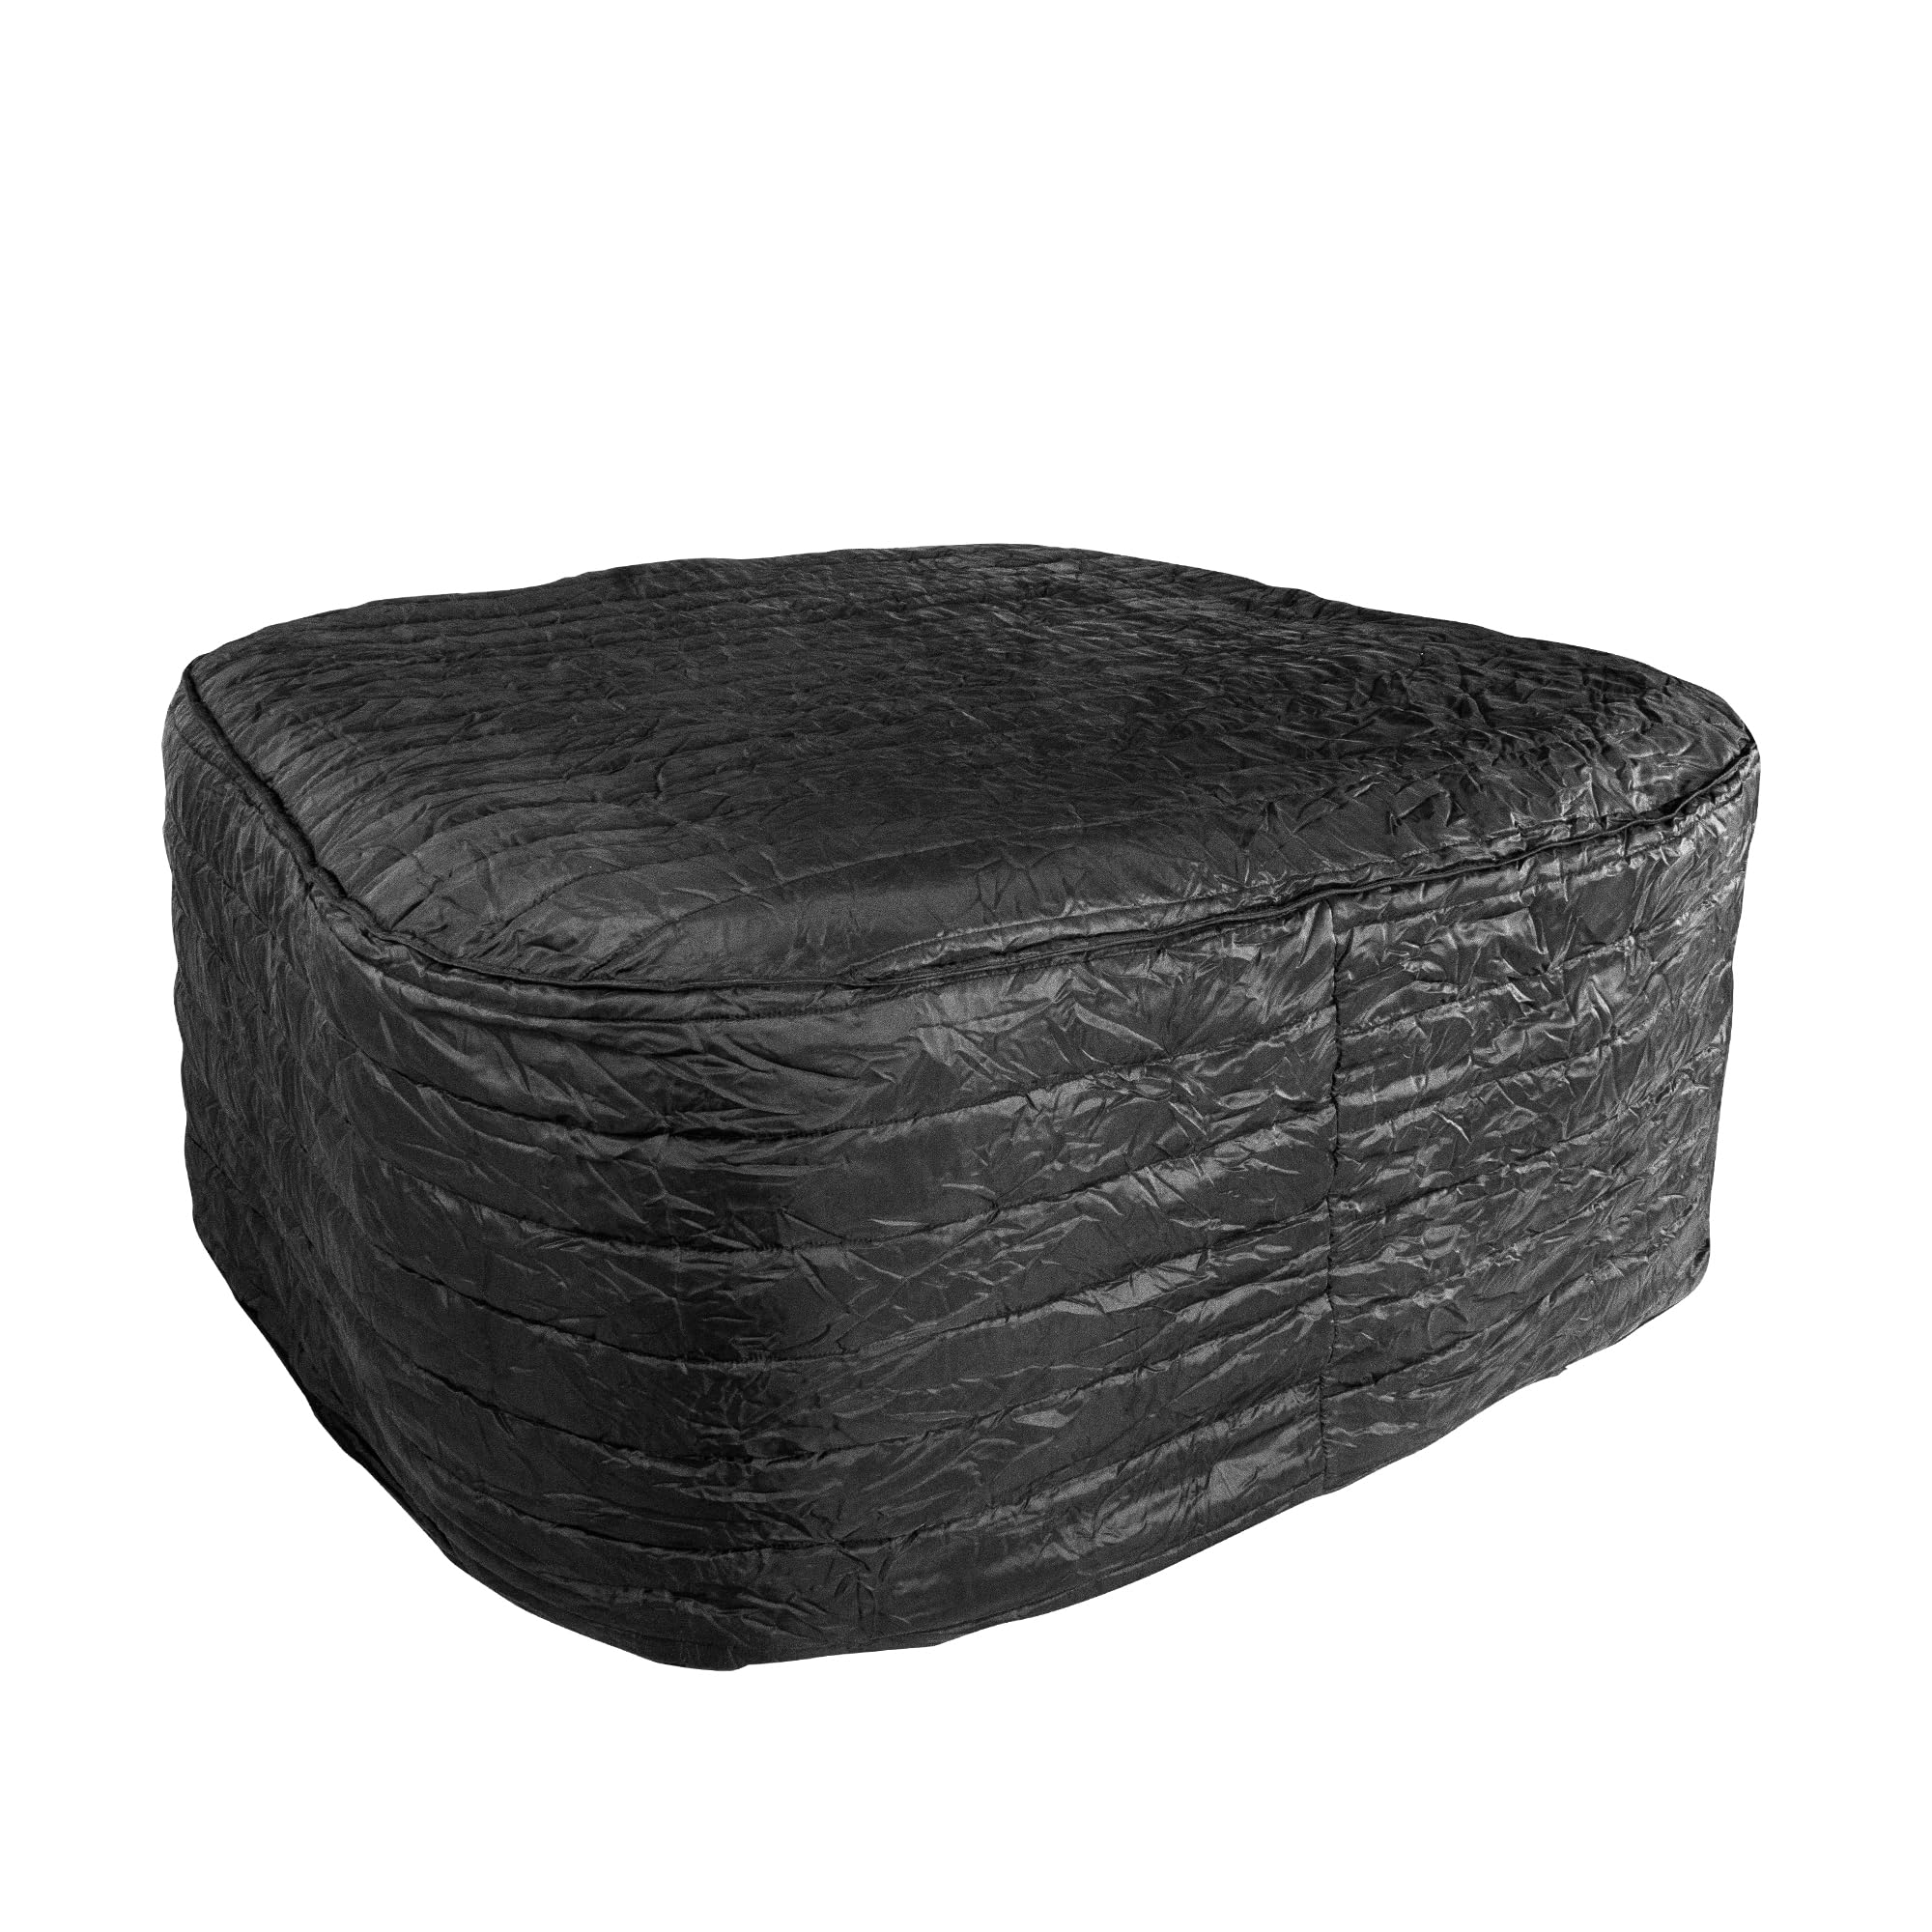 Relxtime Insulated Inflatable Hot Tub Thermal Cover, for 73 inch (6 Person) Square Inflatable Hot Tub